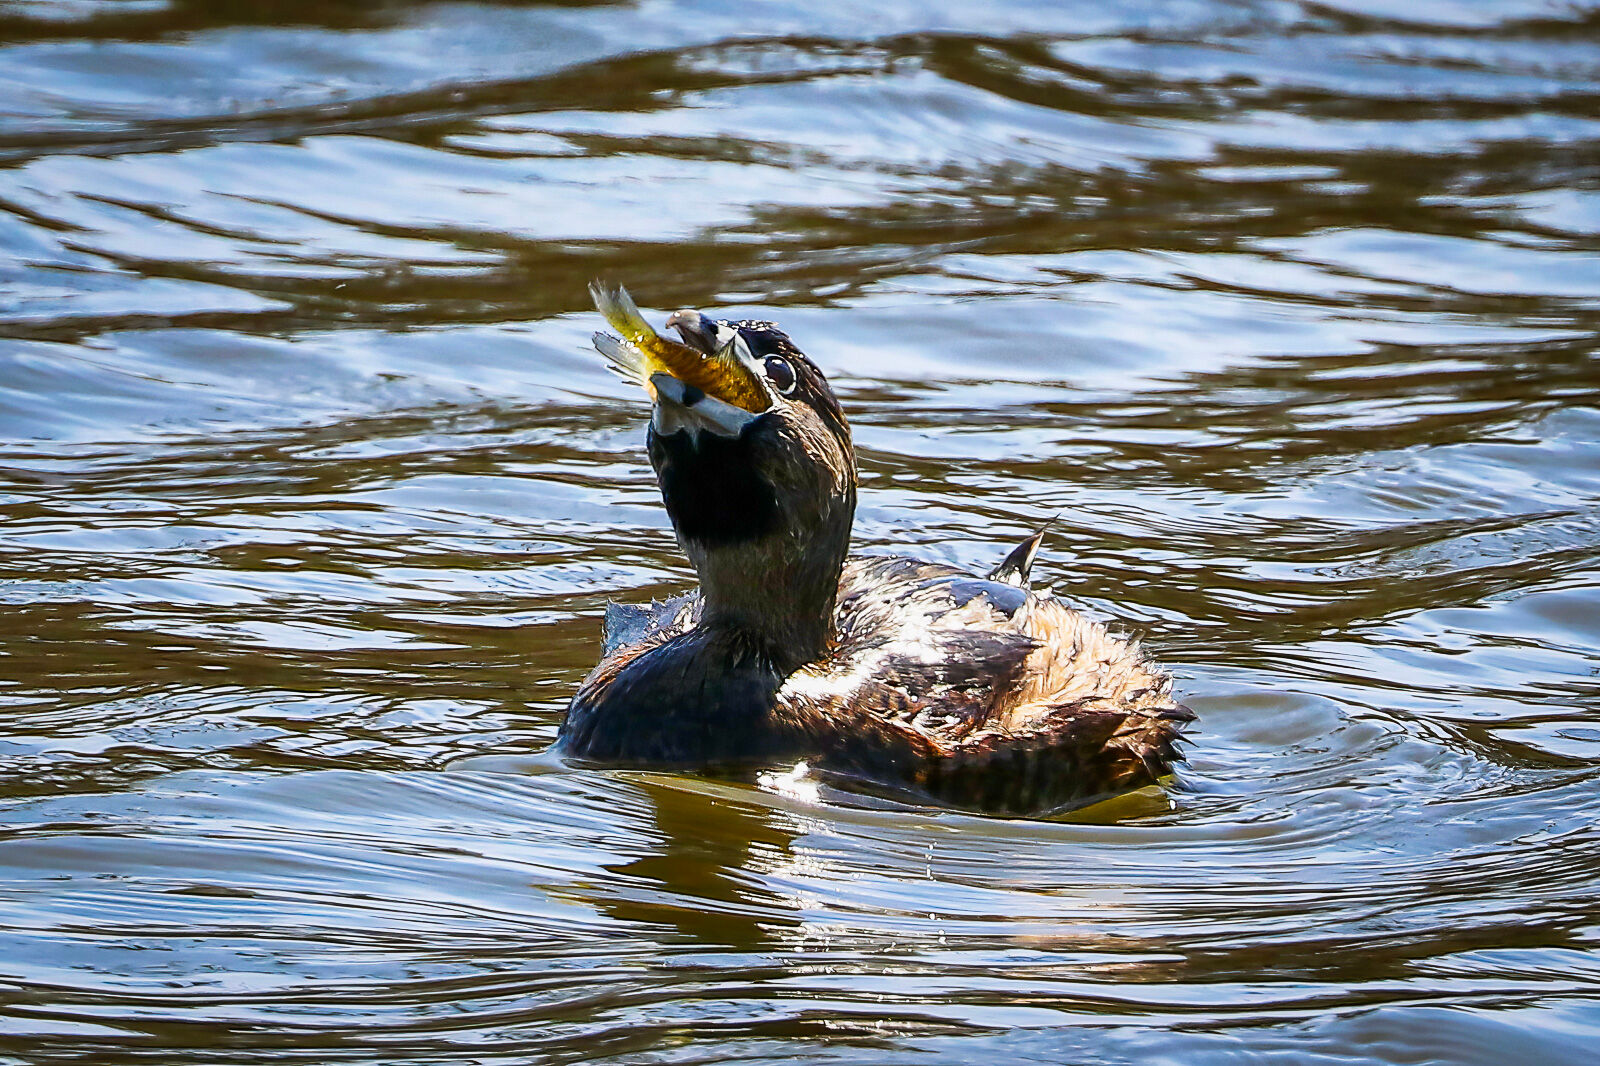 Pied Grebe with a a Fishy Meal